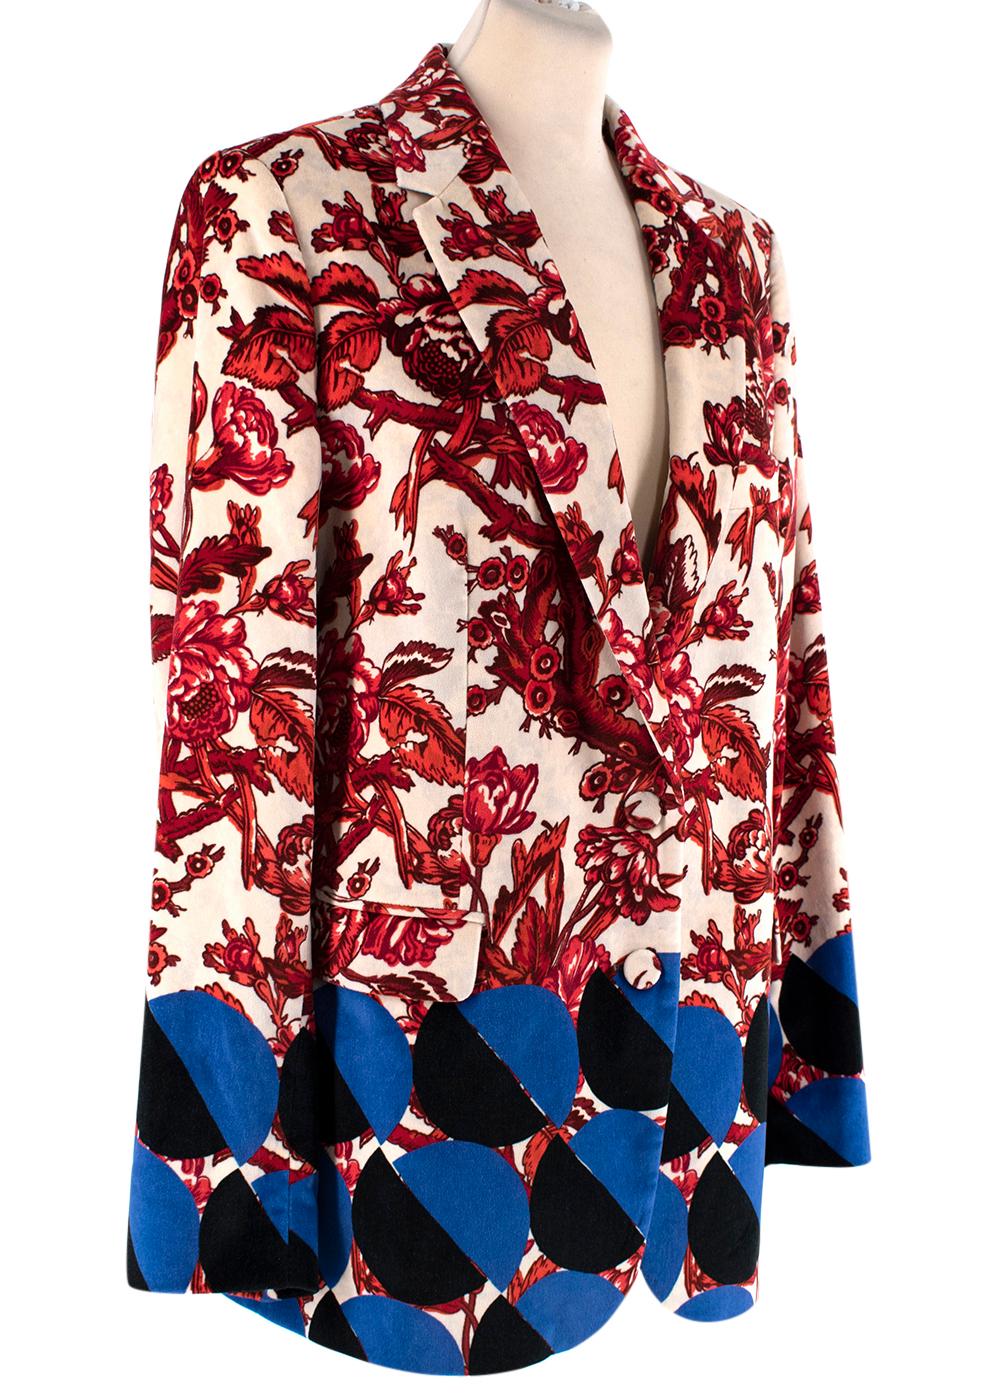 Dries Van Noten Blest Floral Circle Printed Blazer

- Classic-cut single-breasted blazer elevated by a signature DVN print featuring a red floral contrasted with a blue based geometric 
- Breast pocket, and flap hip pockets
-Front button fastening